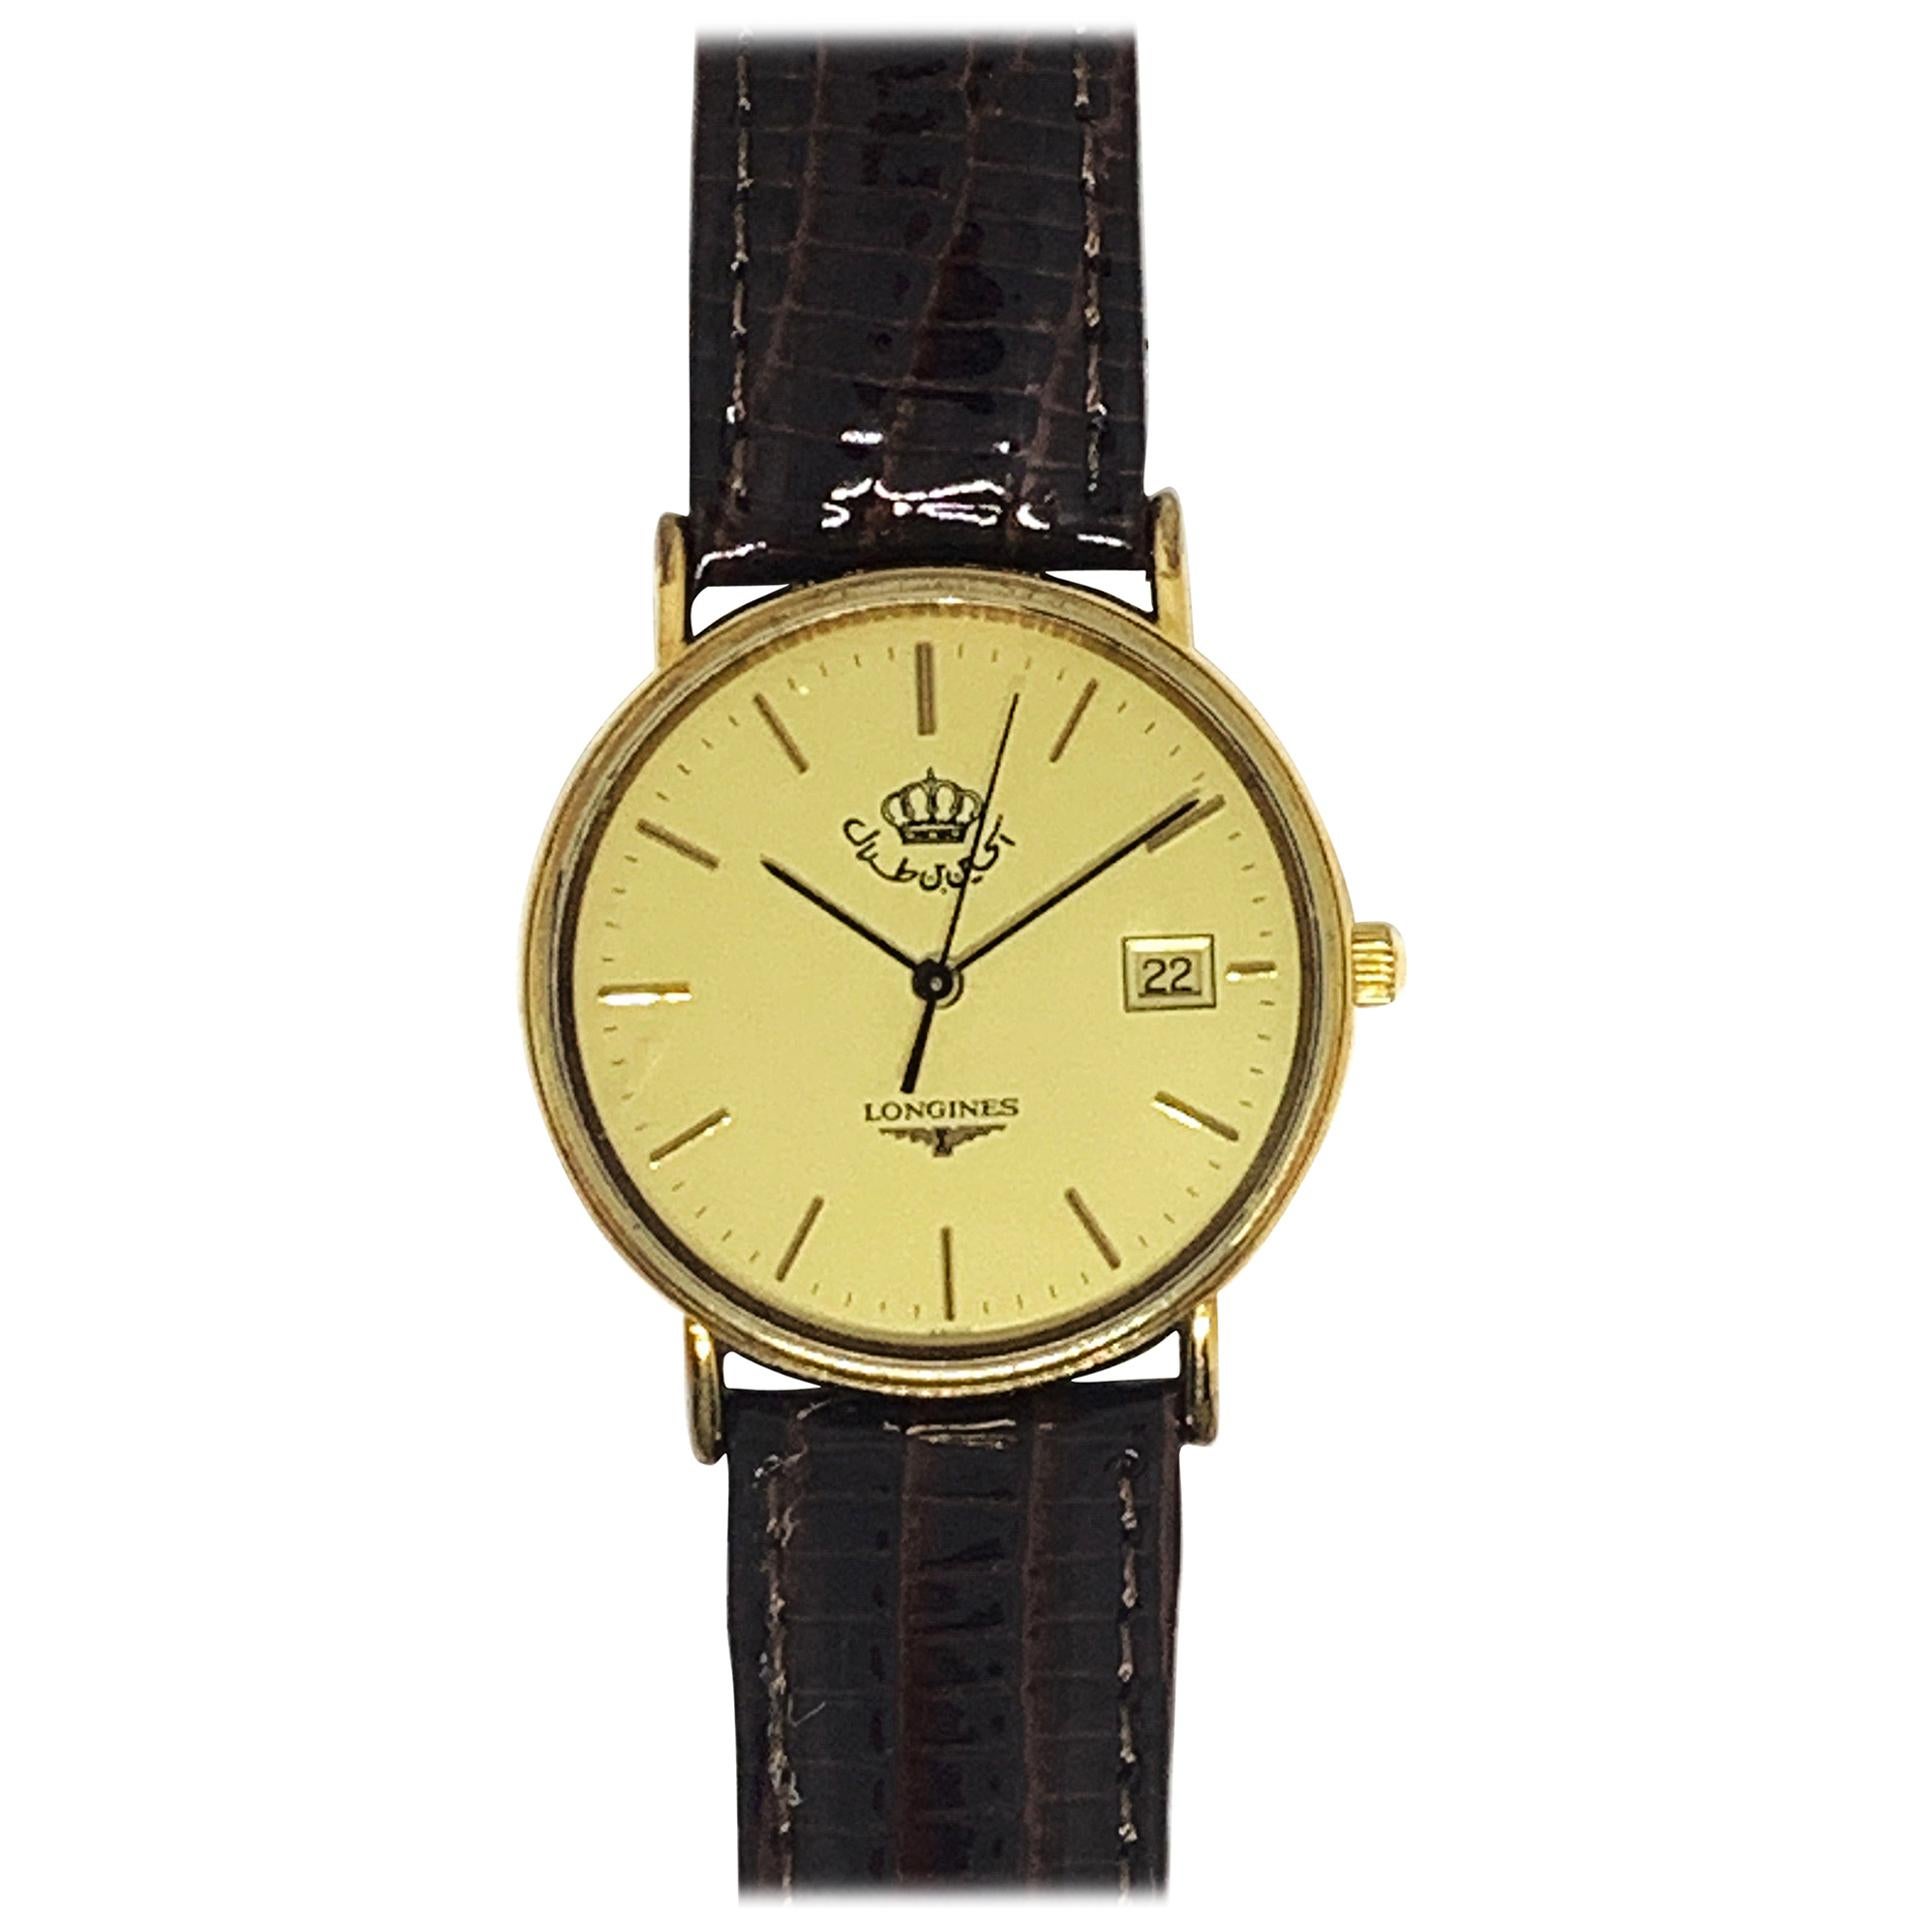 Longines Round Watch Gold-Plated